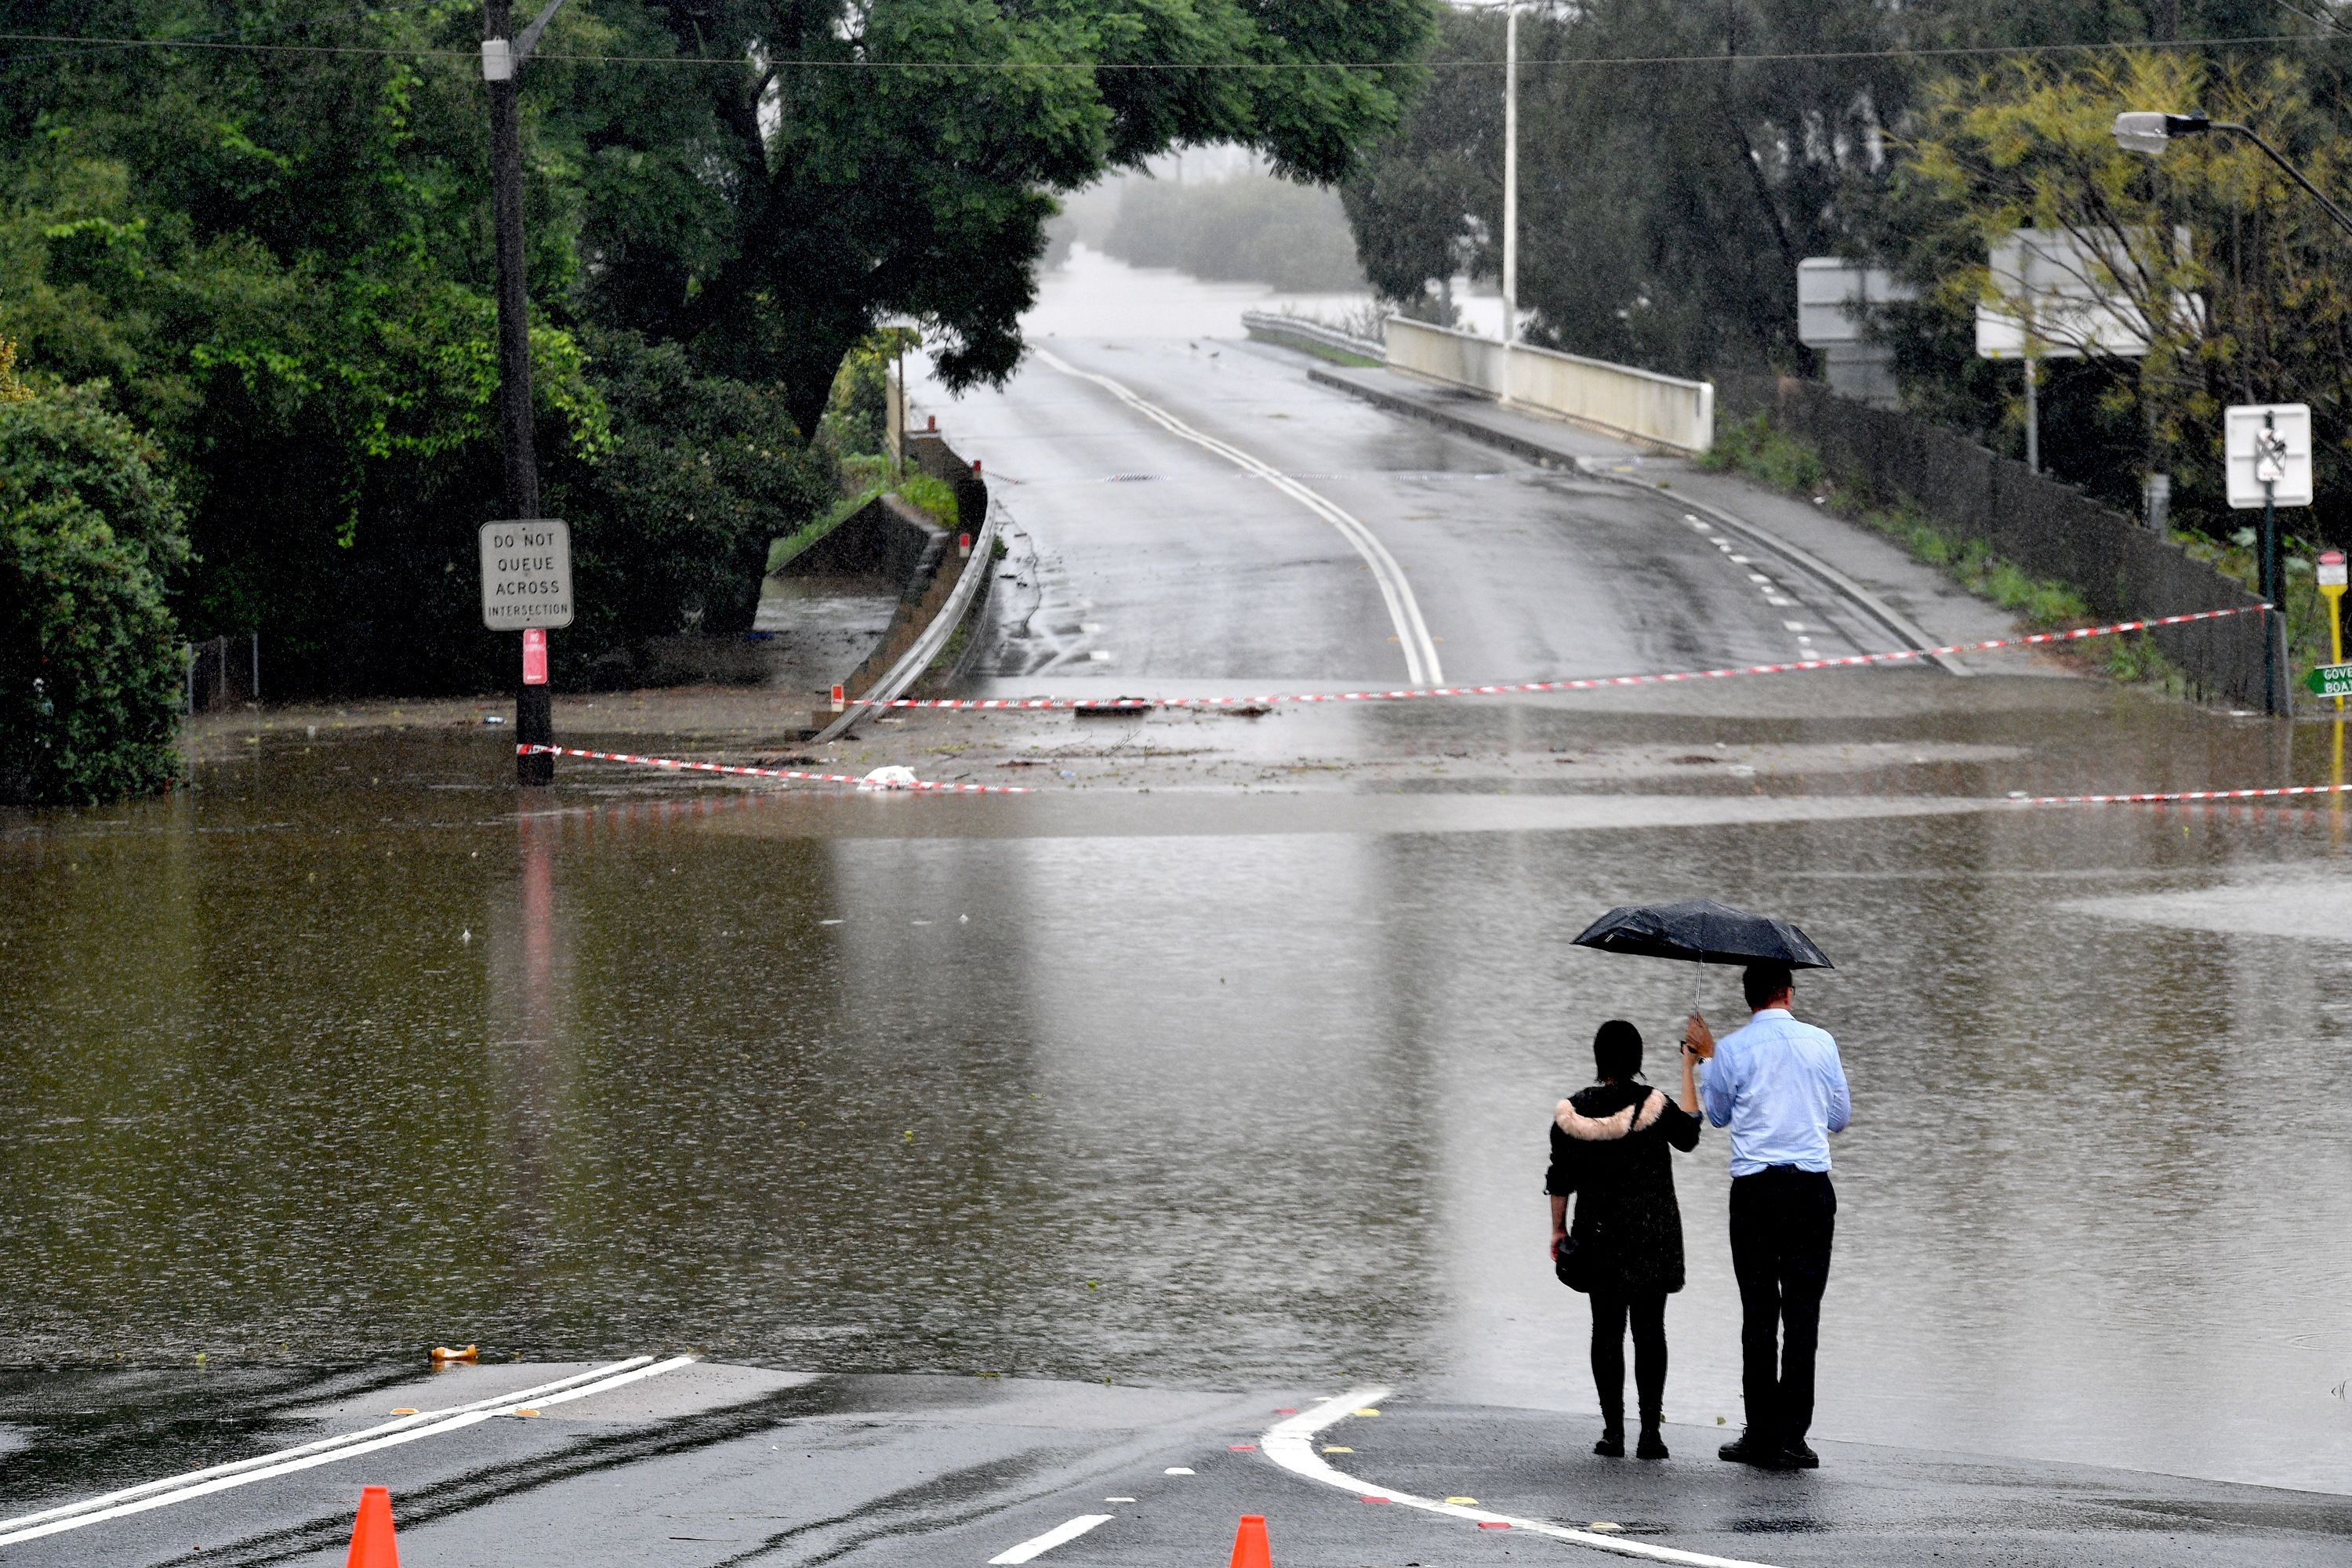  People look out at a flooded residential area in the Windsor area in northwestern Sydney on March 23